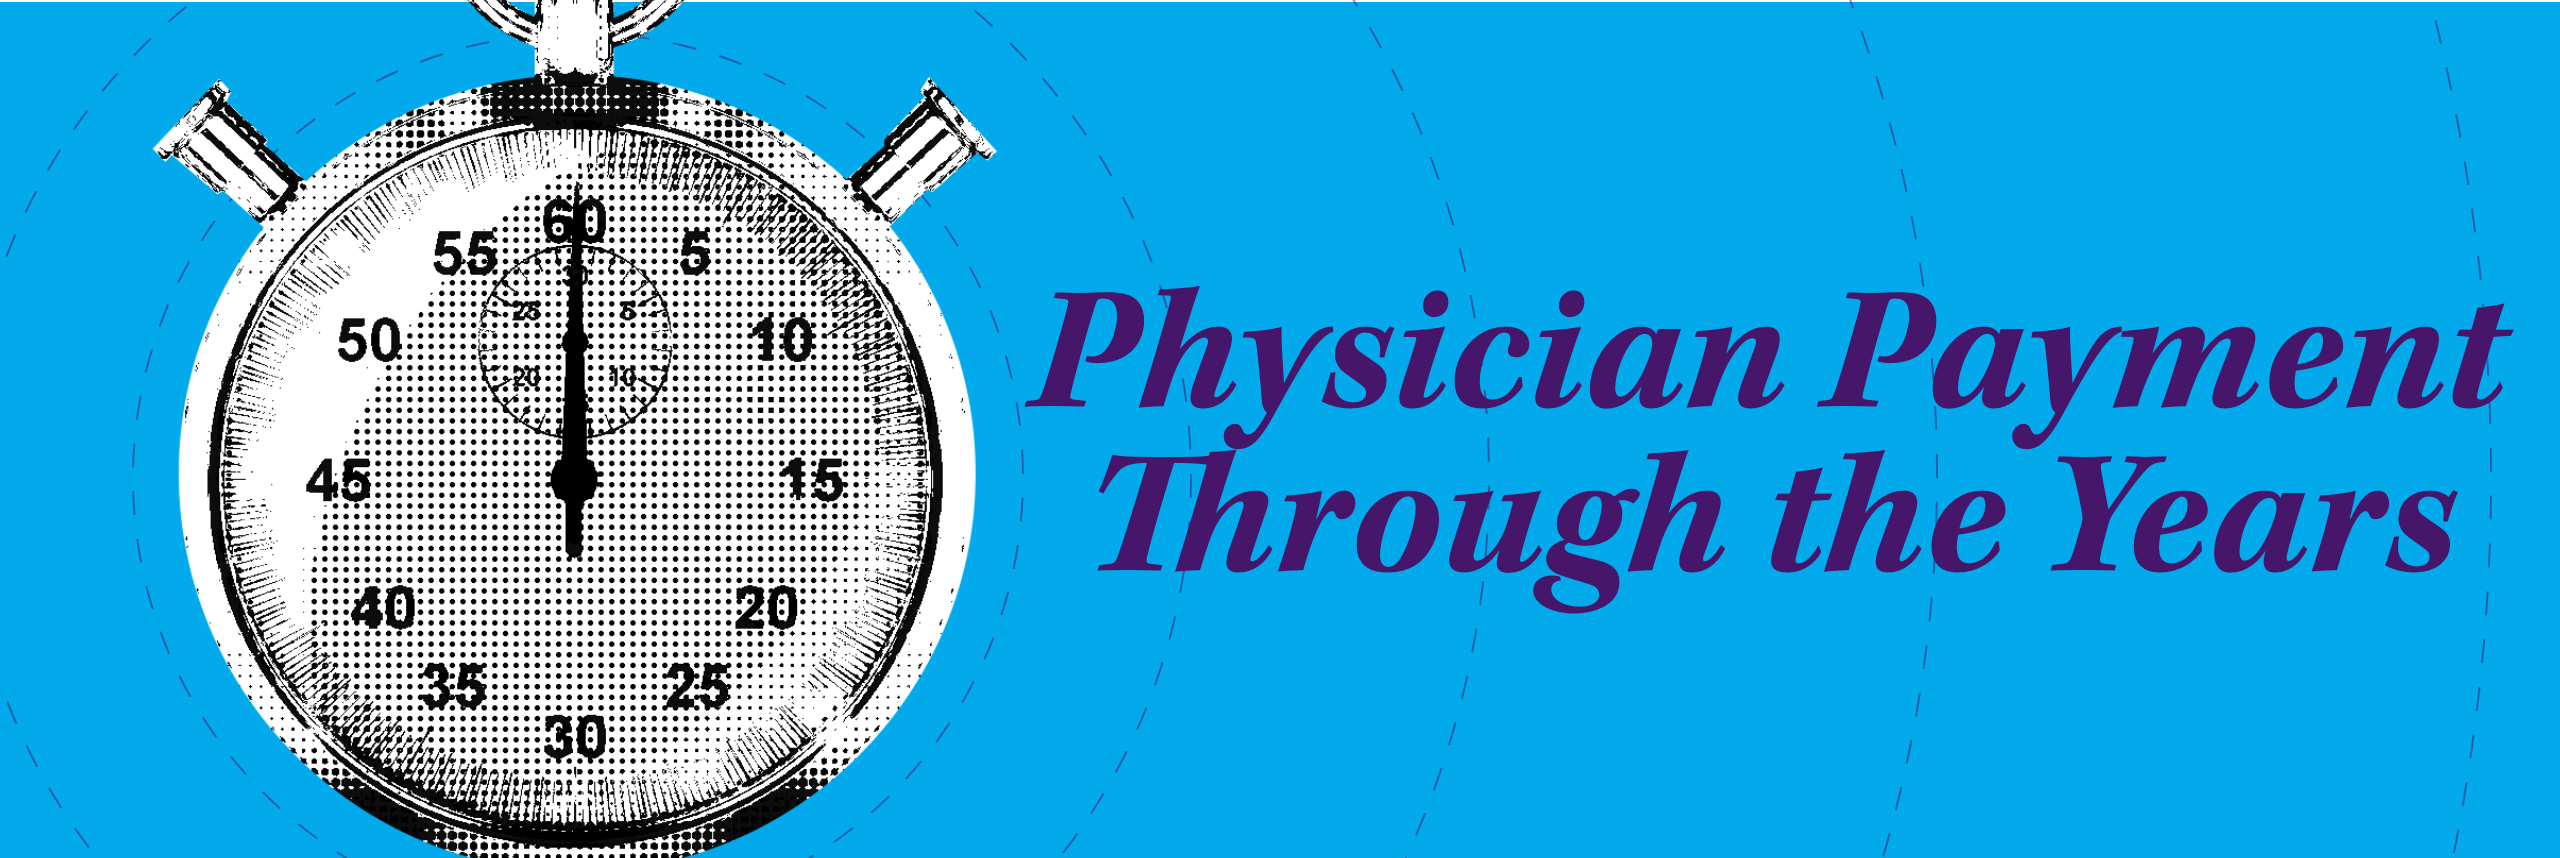 A clock and text that reads "Physician Payment Through the Years"